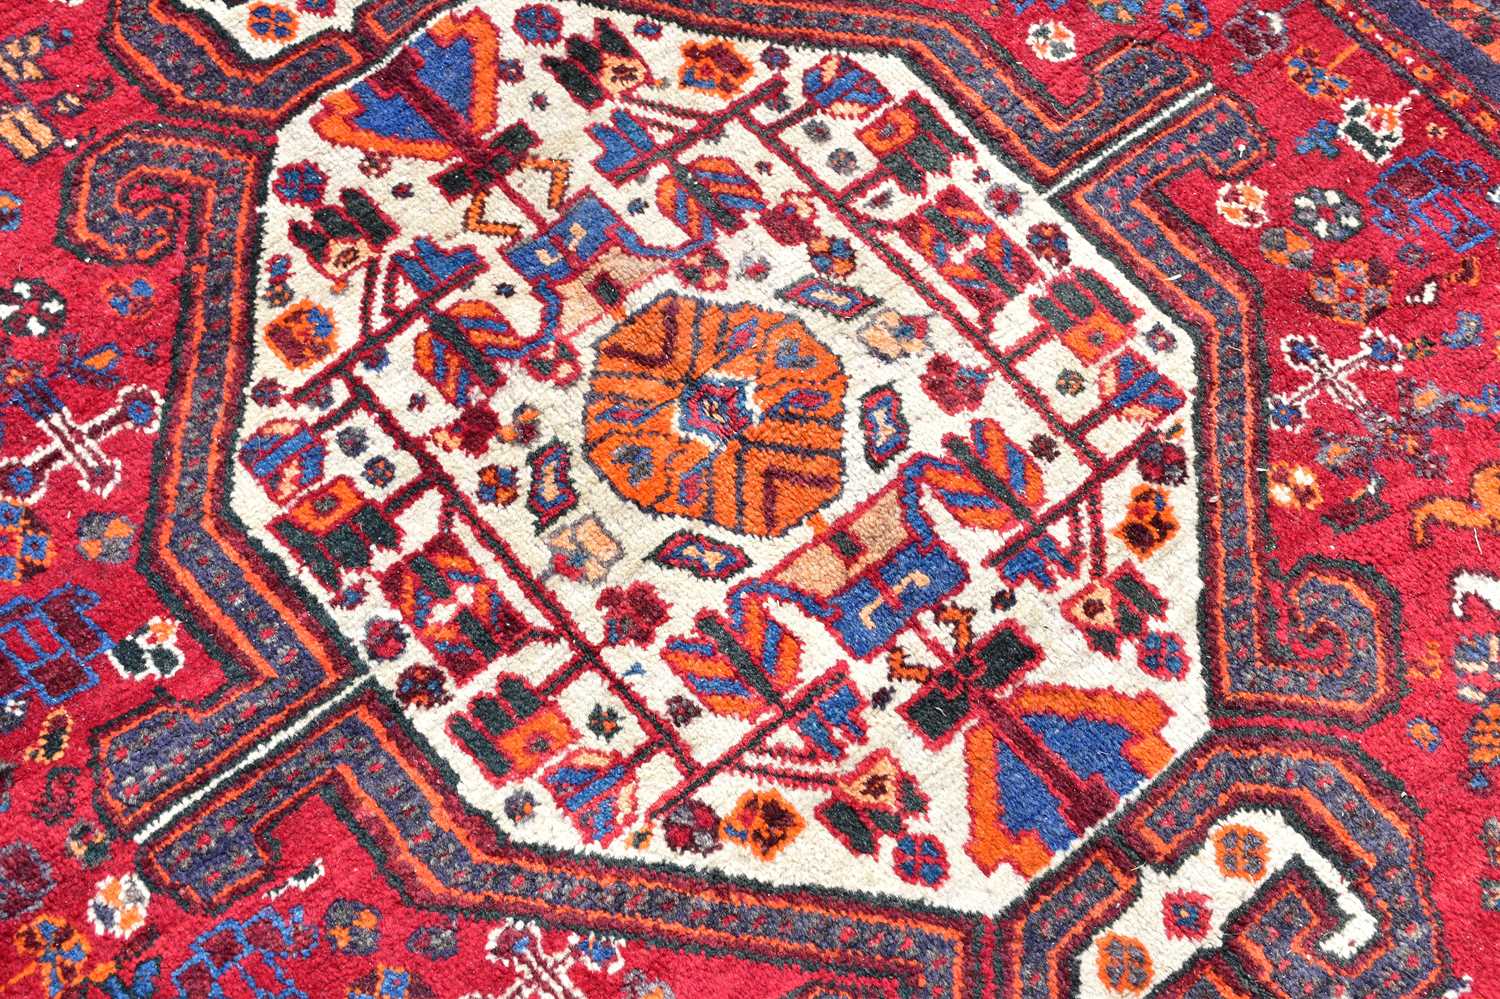 A red ground wool rug with central geometric pattern, 209 x 138cm. - Image 2 of 3